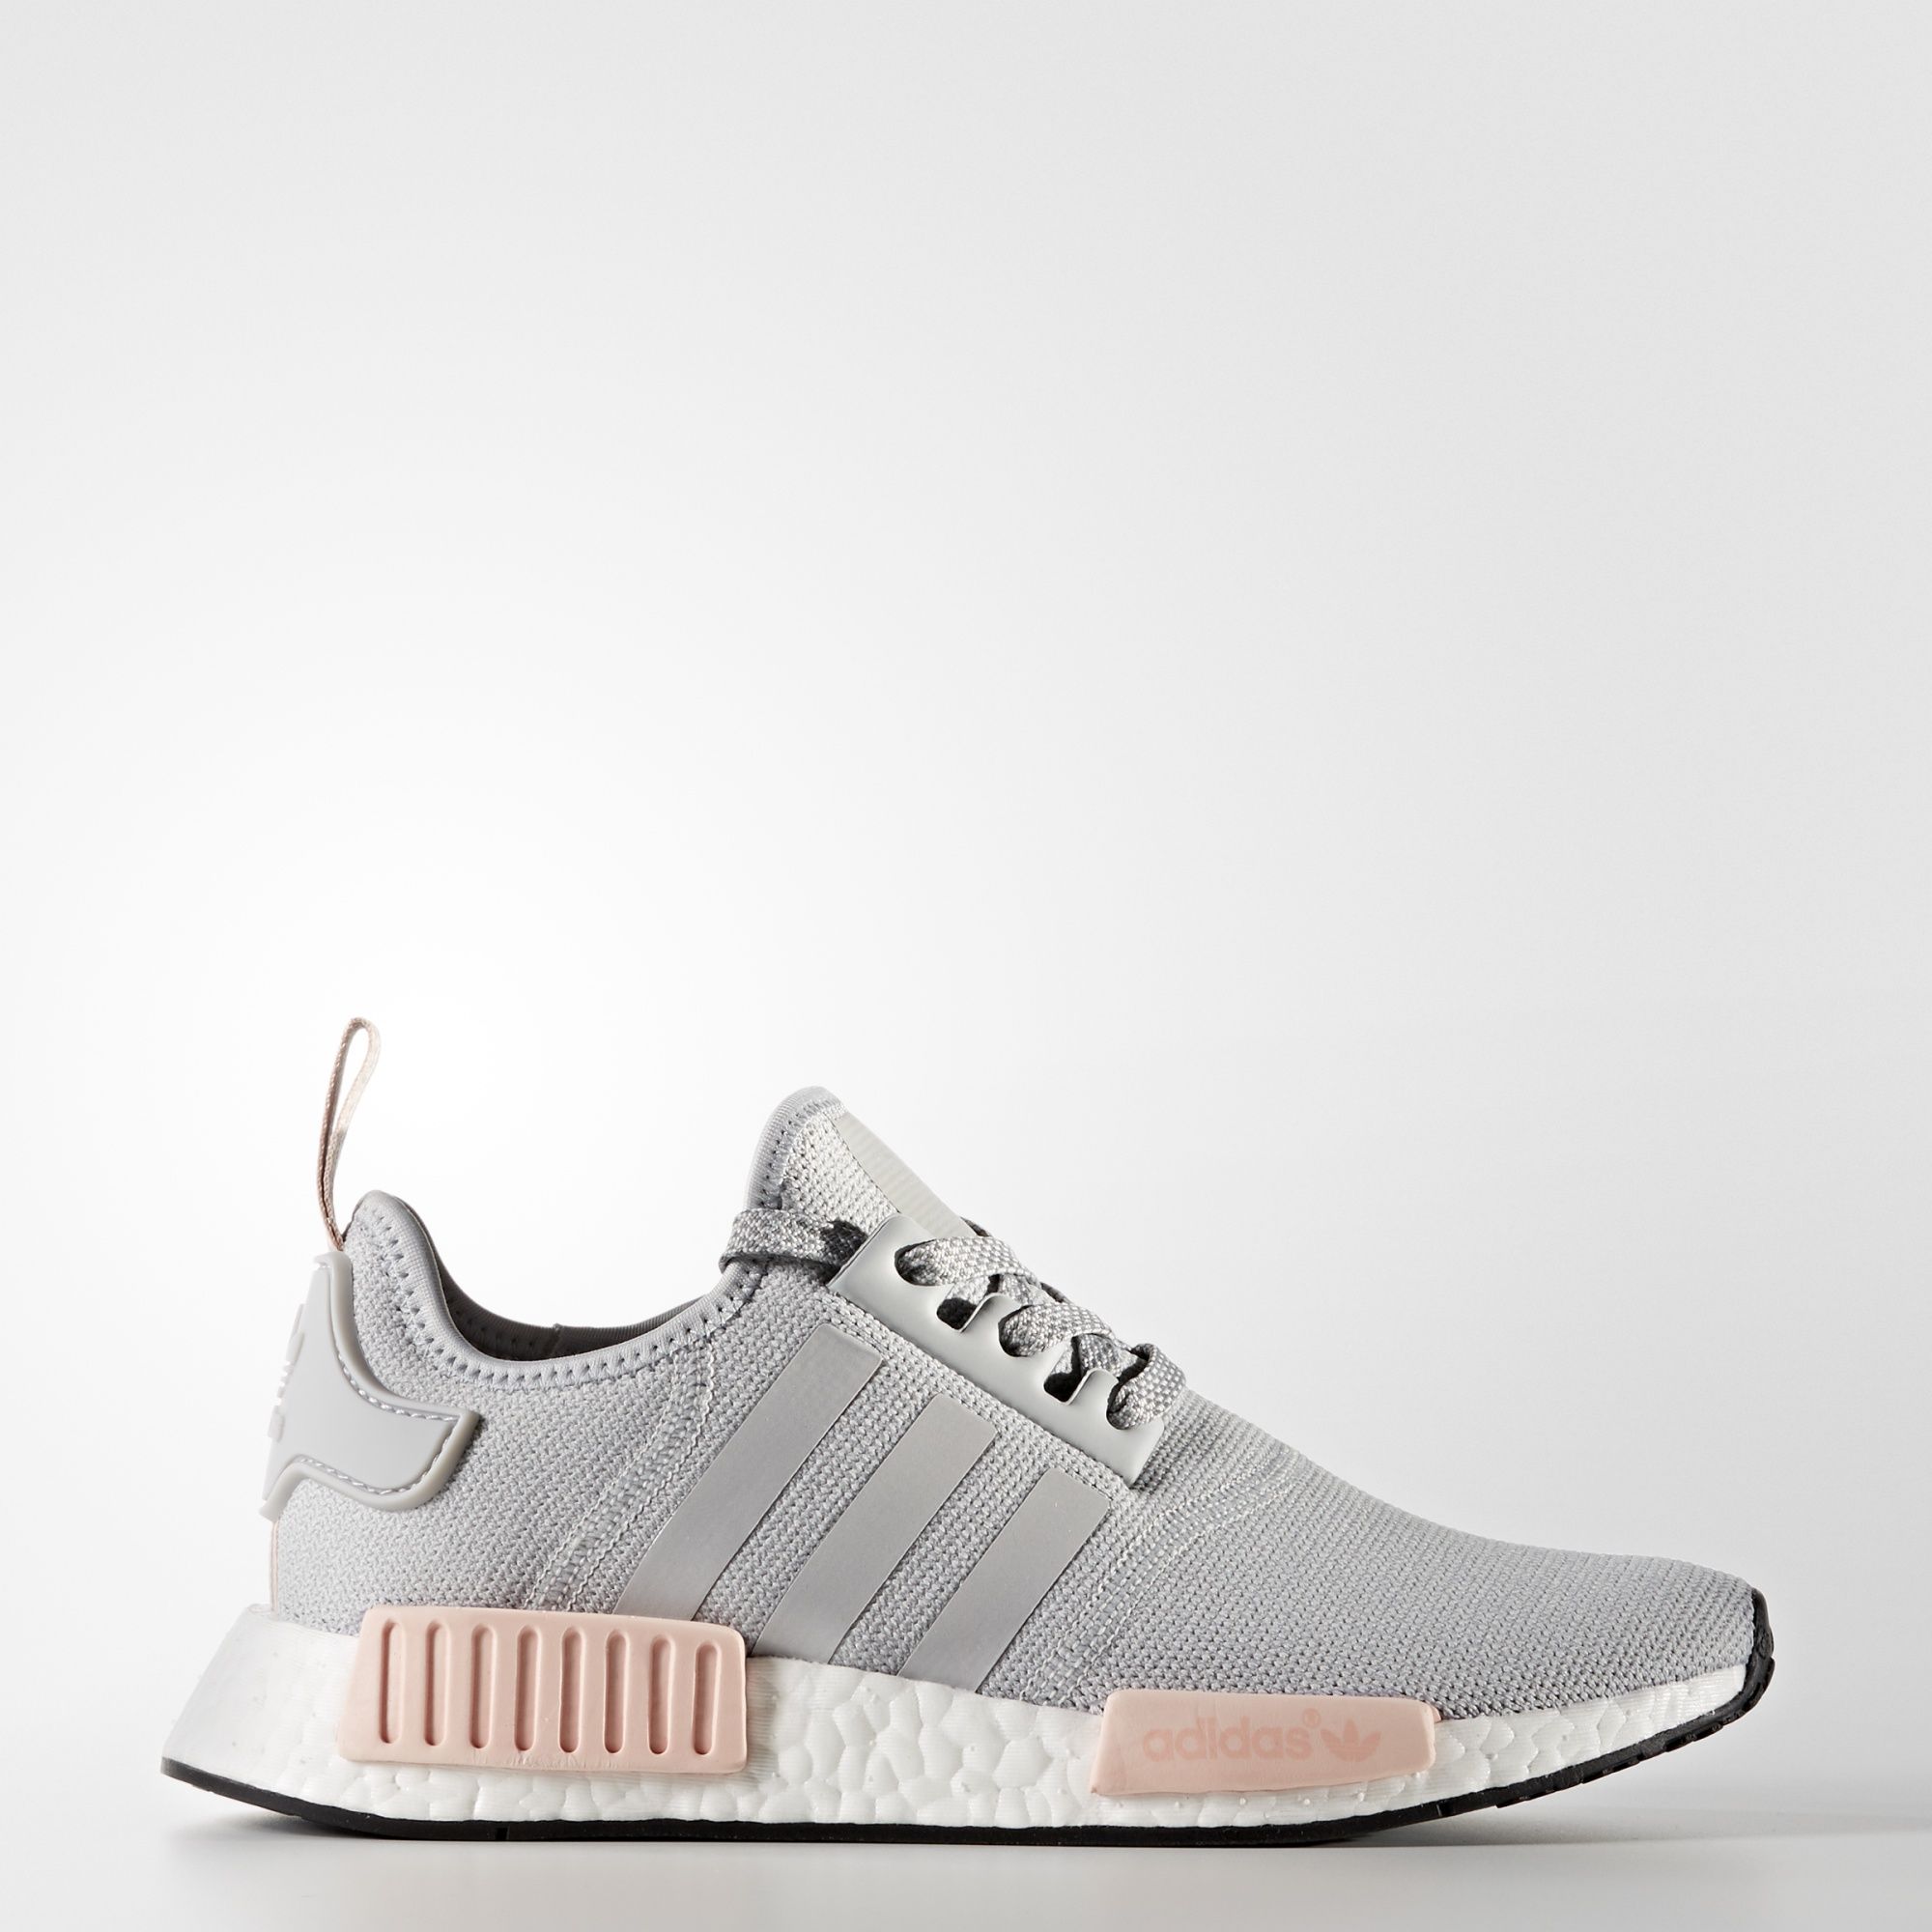 adidas-wmns-nmd_r1-clear-onix-vapour-pink-2